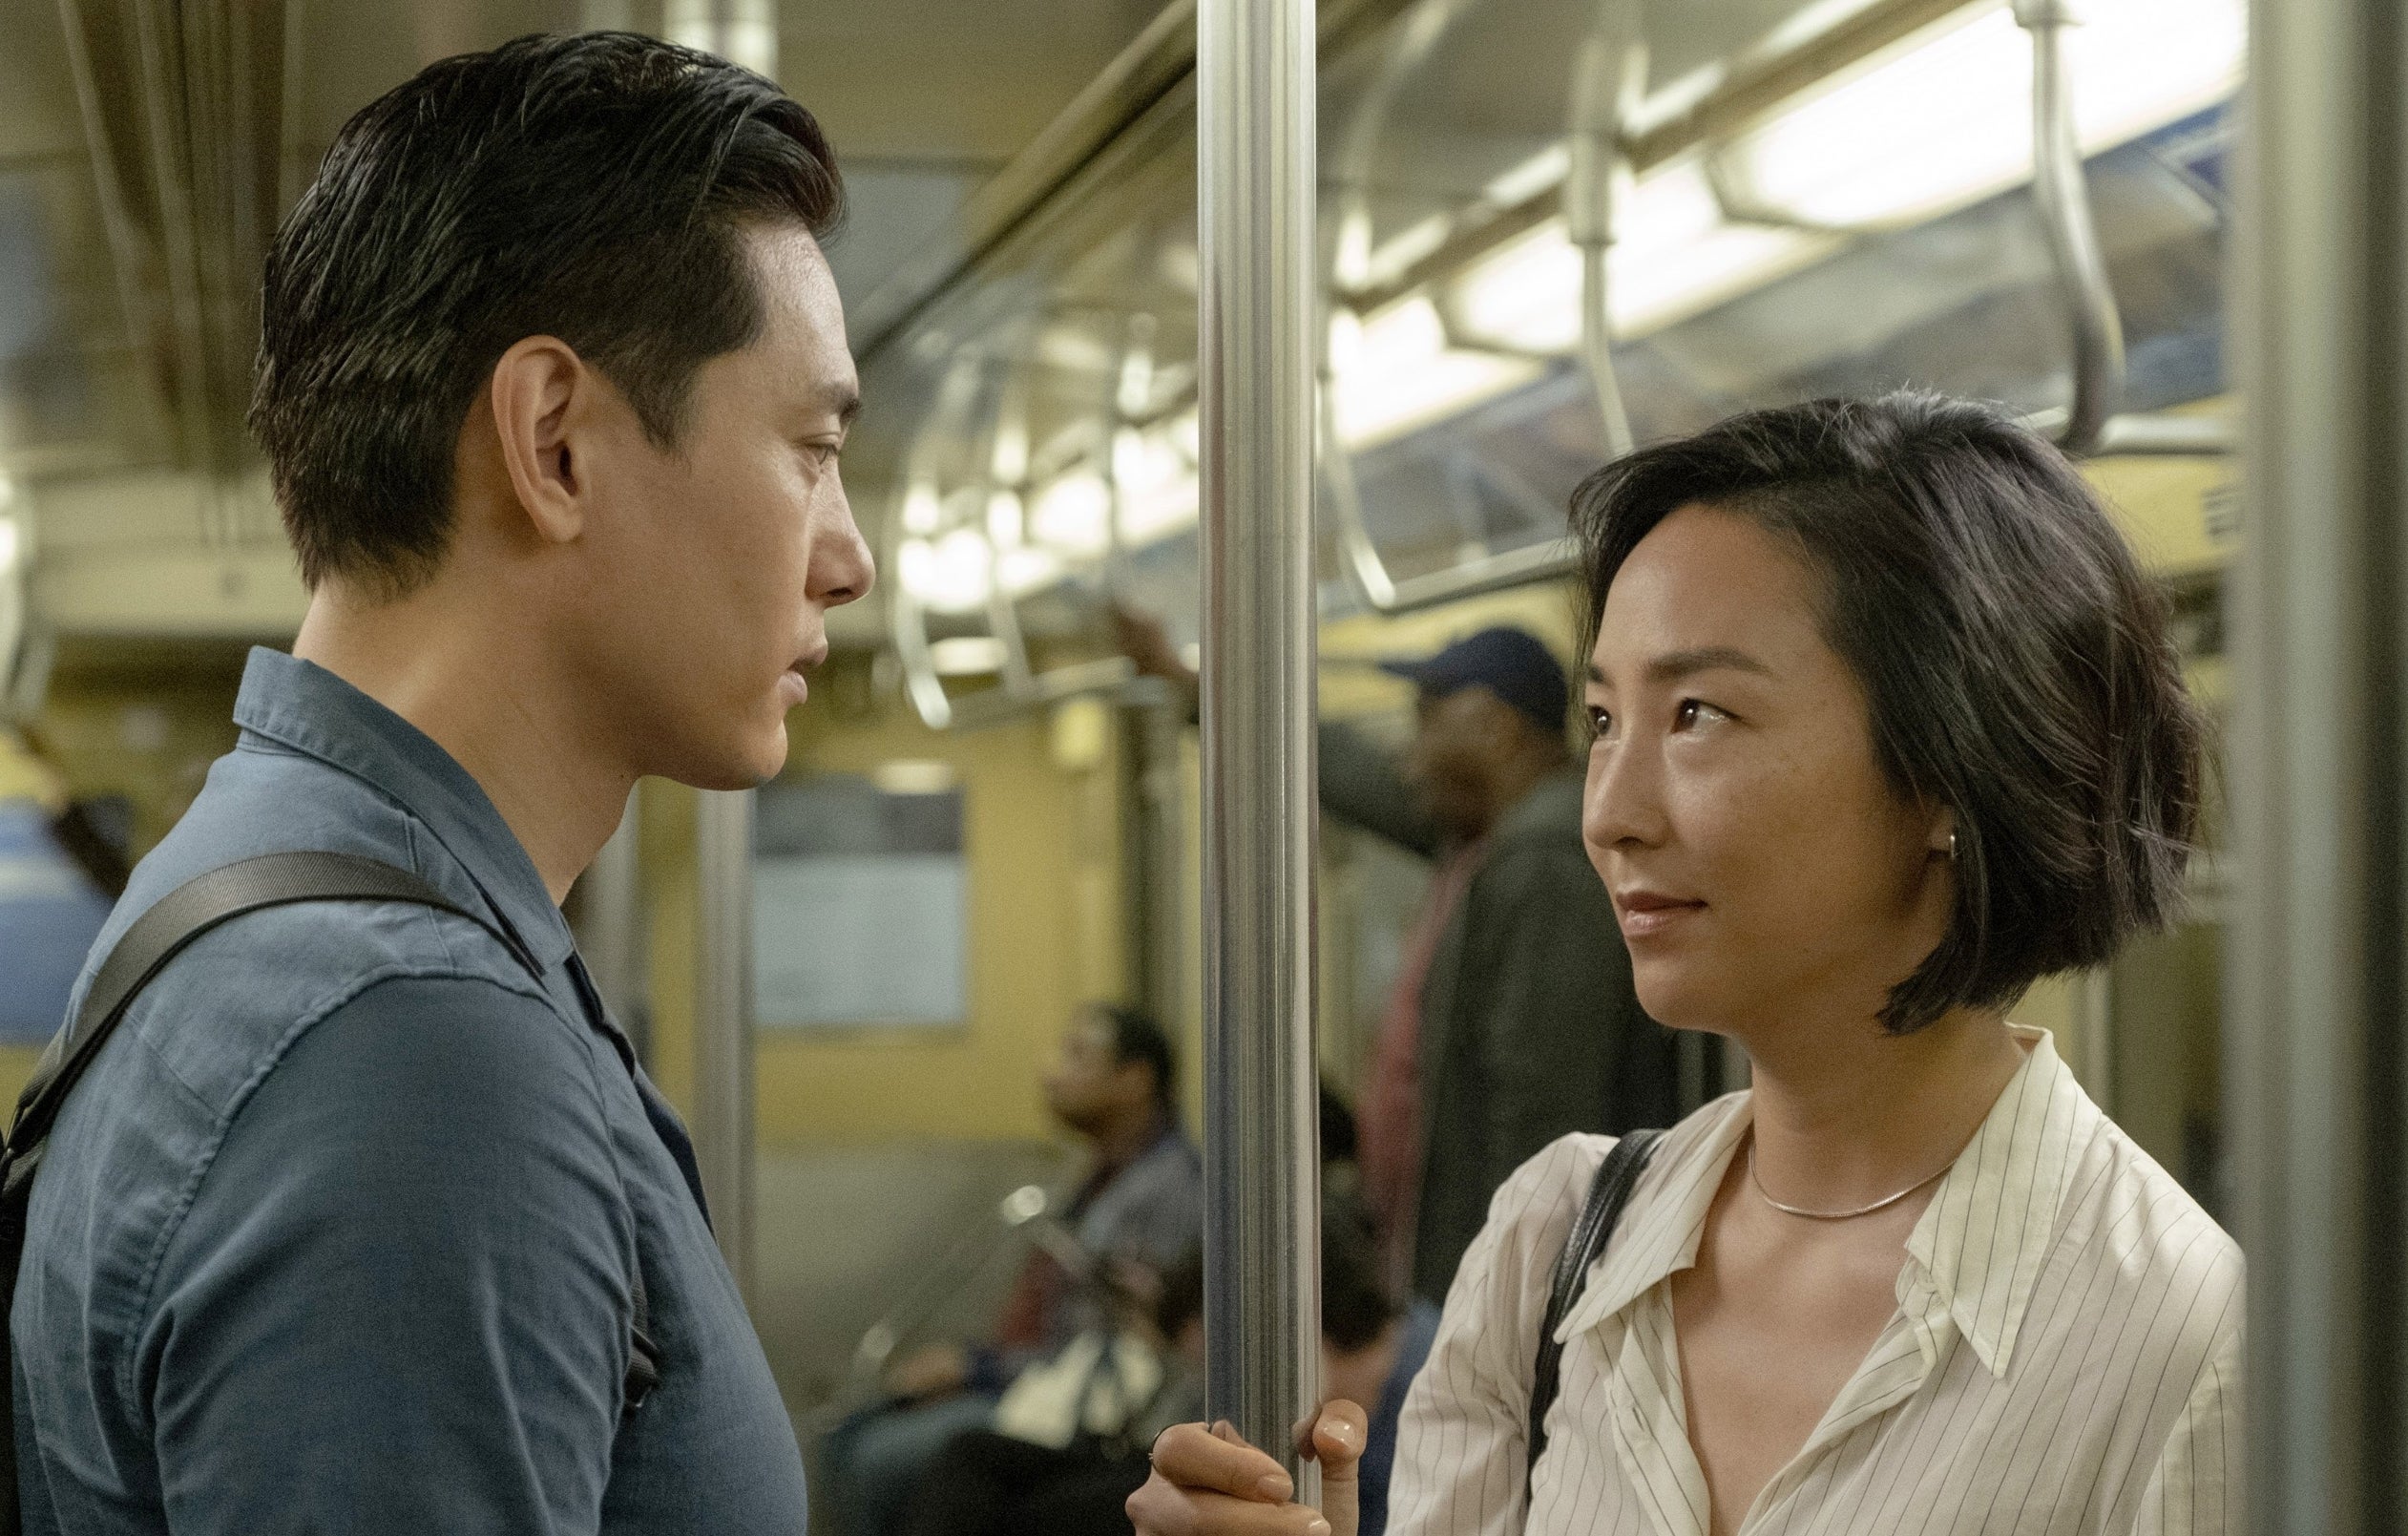 Greta Lee) and Teo Yoo in a subway scene, standing and facing each other, with a pole between them